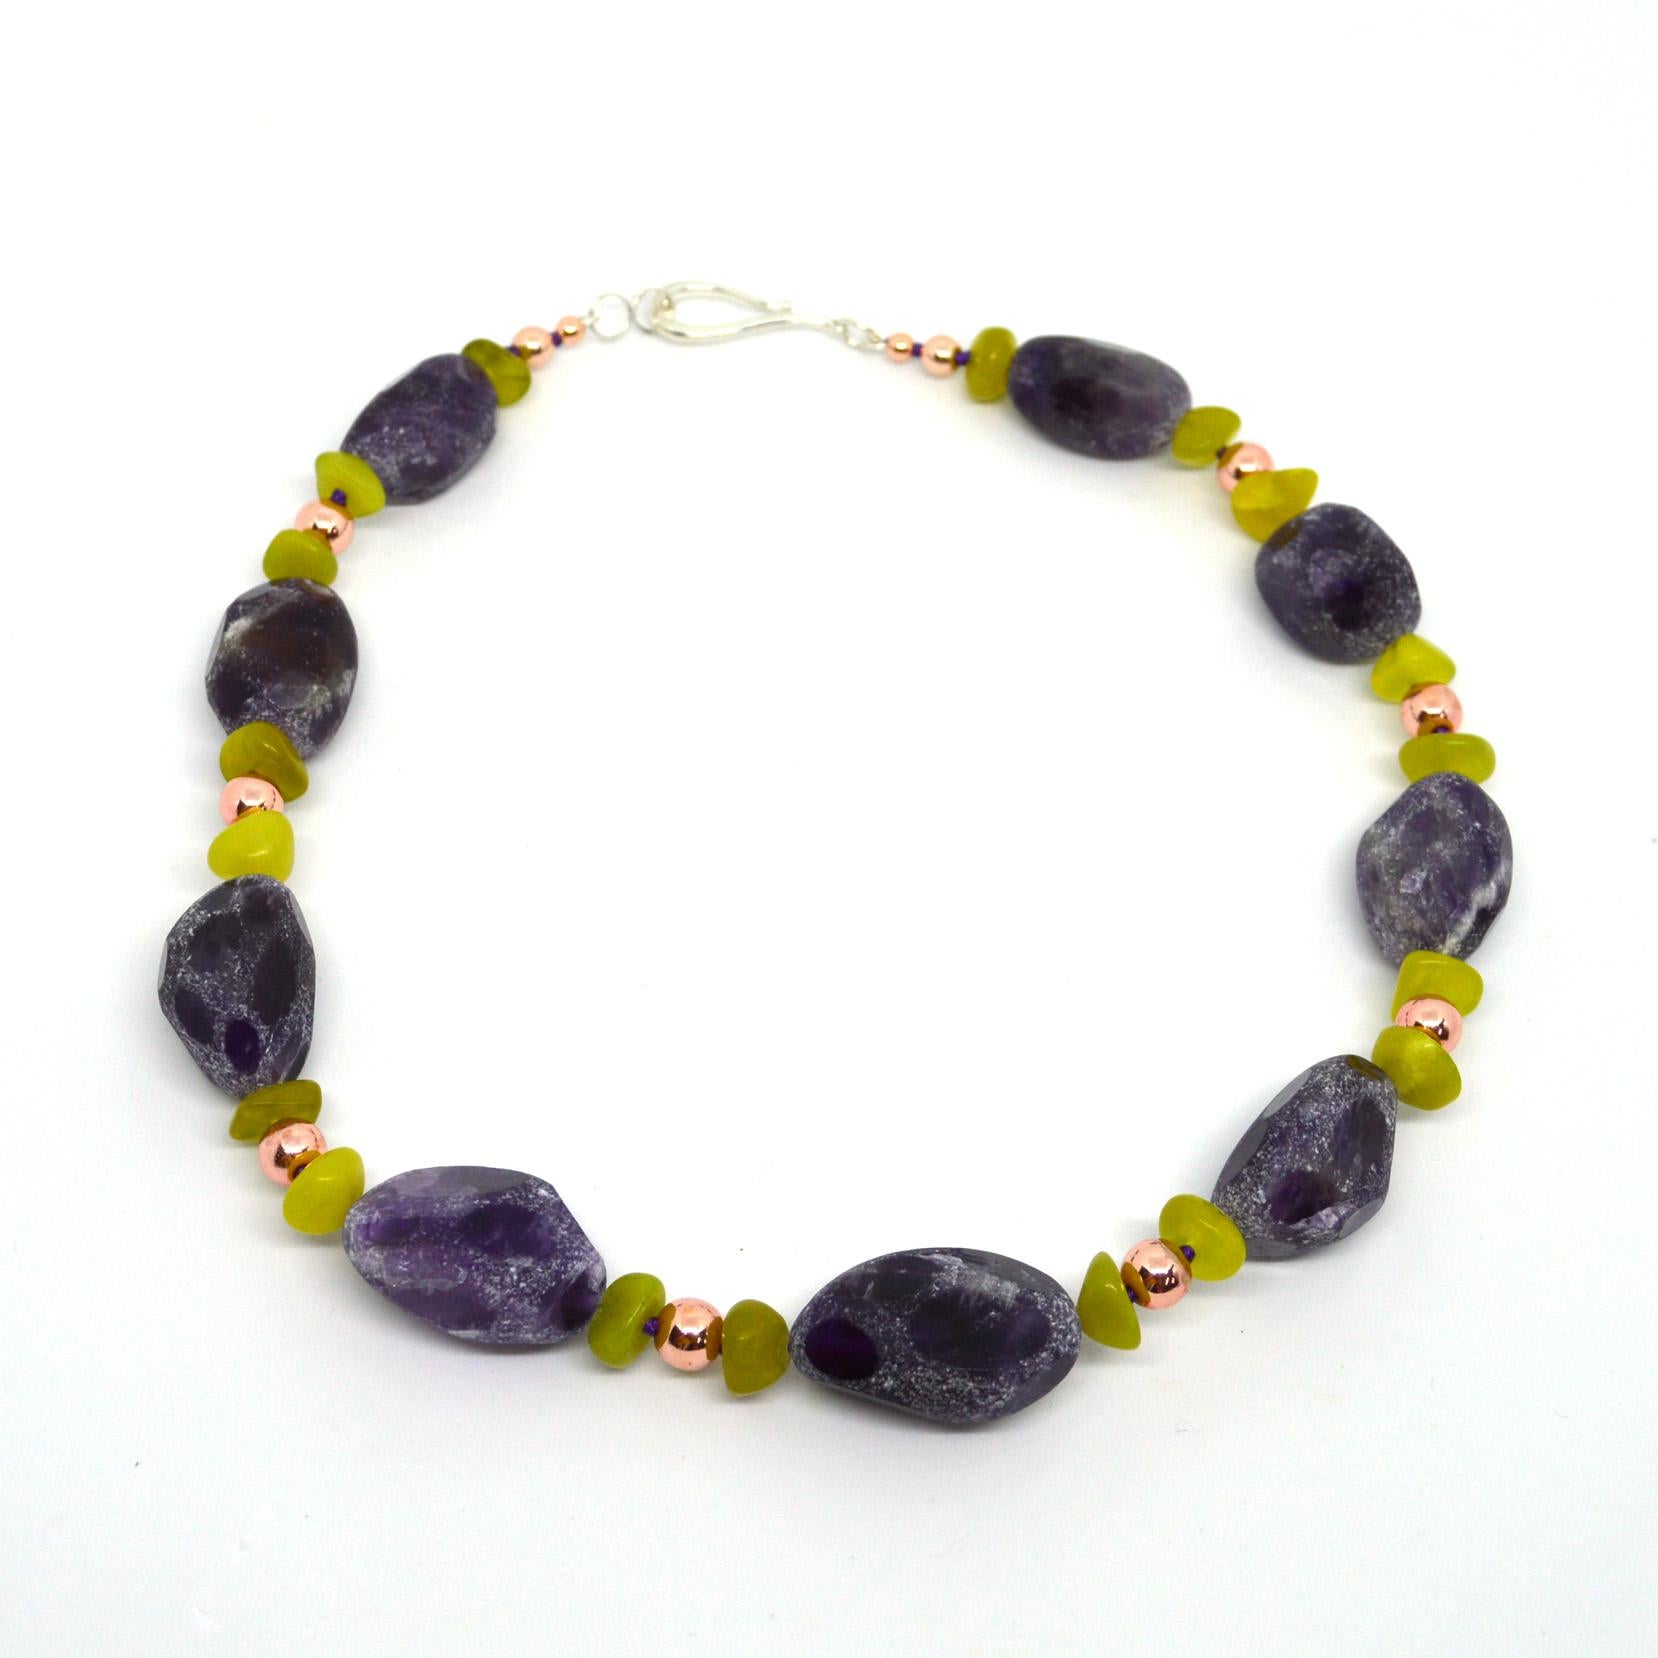 Amethyst Acid Polished Nugget approximately 25mm beads with Korean Jade nuggets and rose gold plated hematite. Hand knotted on purple thread 40mm Sterling Silver hook Clasp.

Finished necklace measures 51cm.






